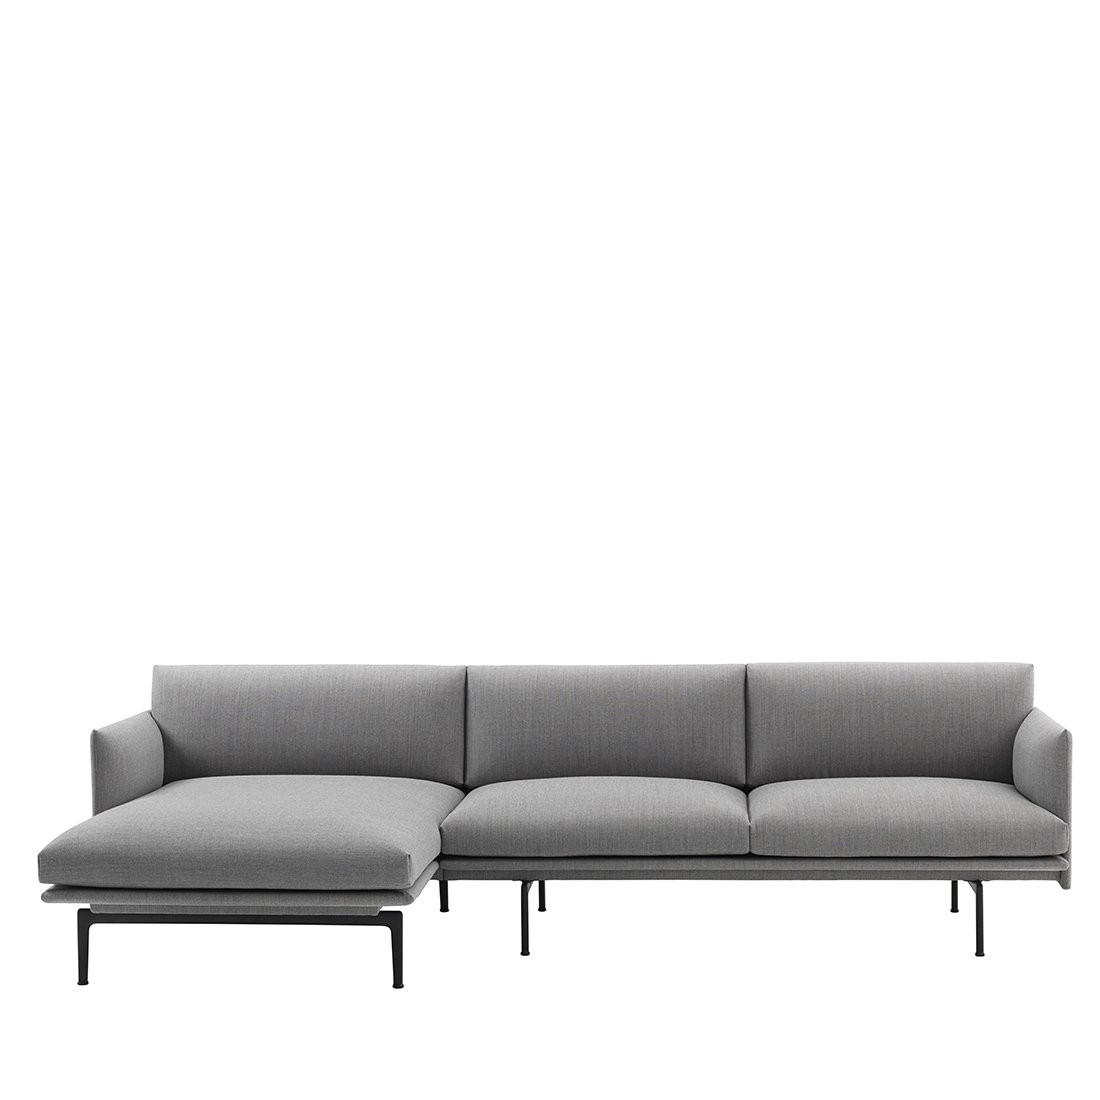 Muuto Outline Bank met Chaise Longue Links - Fiord 151